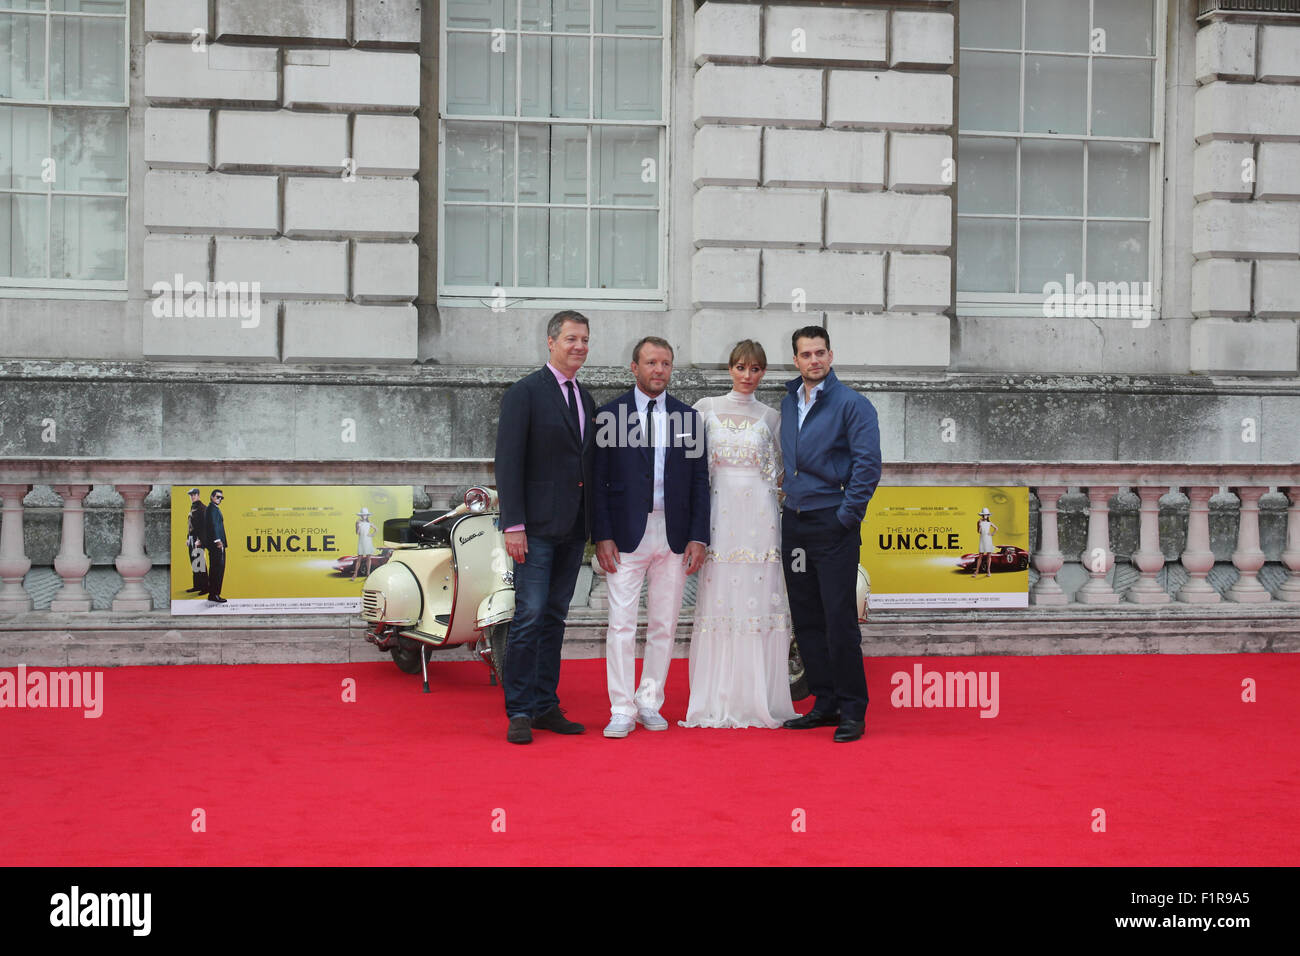 London, UK, 7th Aug 2015: (L-R) Lionel Wigram, Guy Ritchie, Jacqui Ainsley and Henry Cavill attend The Man from U.N.C.L.E. - UK Stock Photo